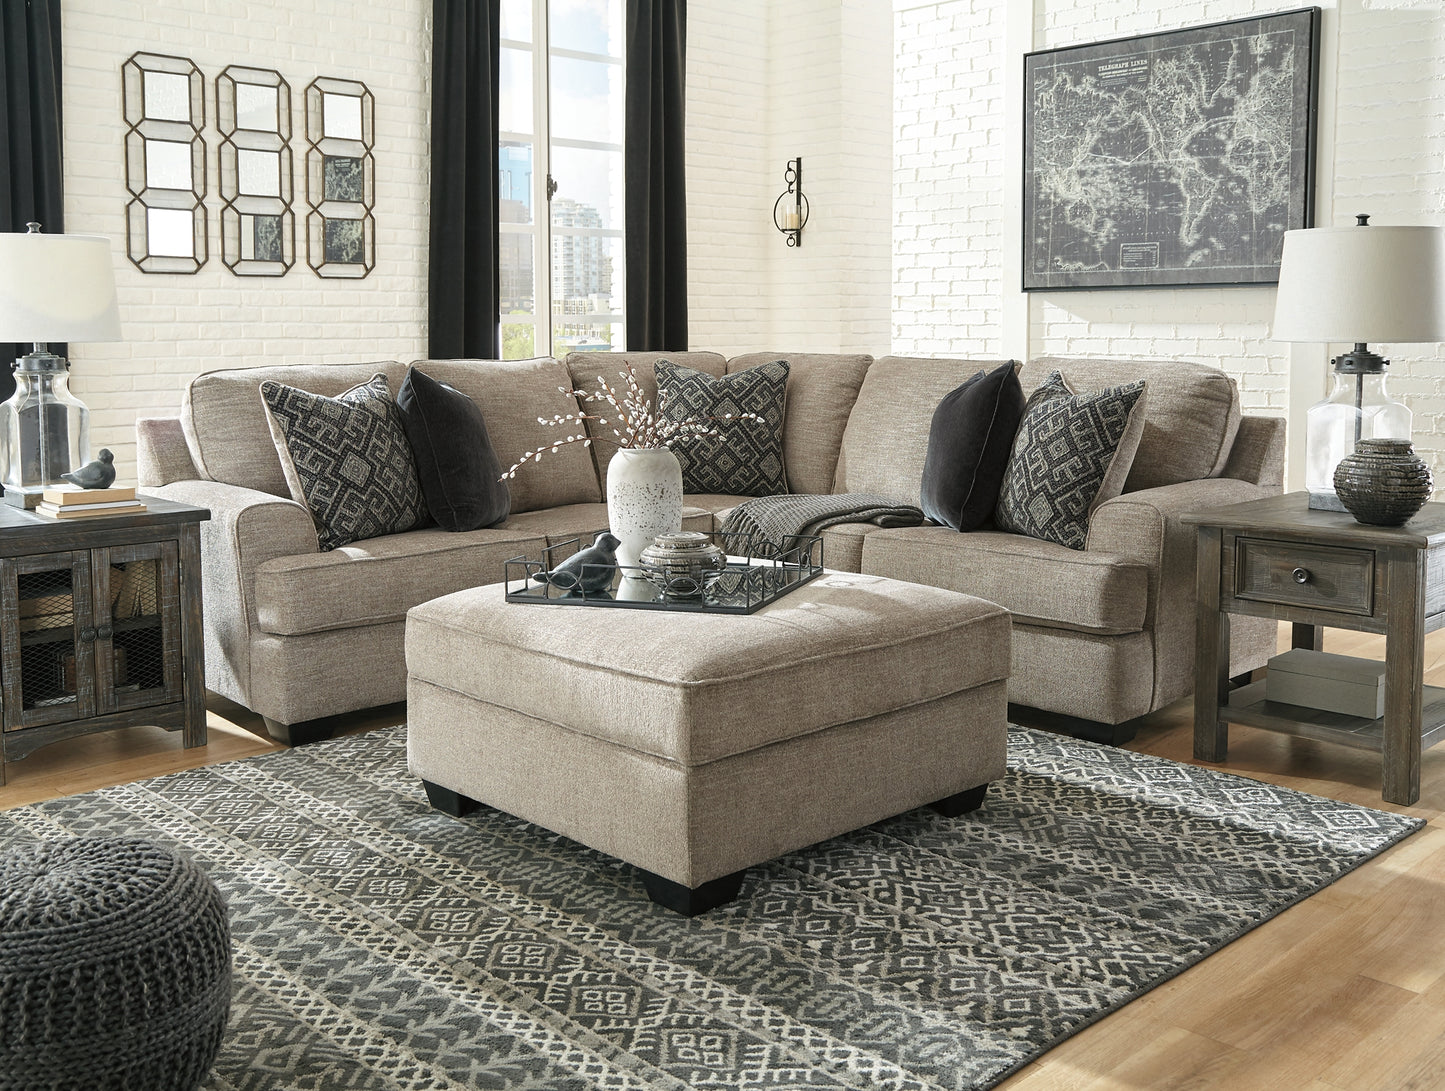 Bovarian 2-Piece Sectional with Ottoman Wilson Furniture (OH)  in Bridgeport, Ohio. Serving Bridgeport, Yorkville, Bellaire, & Avondale